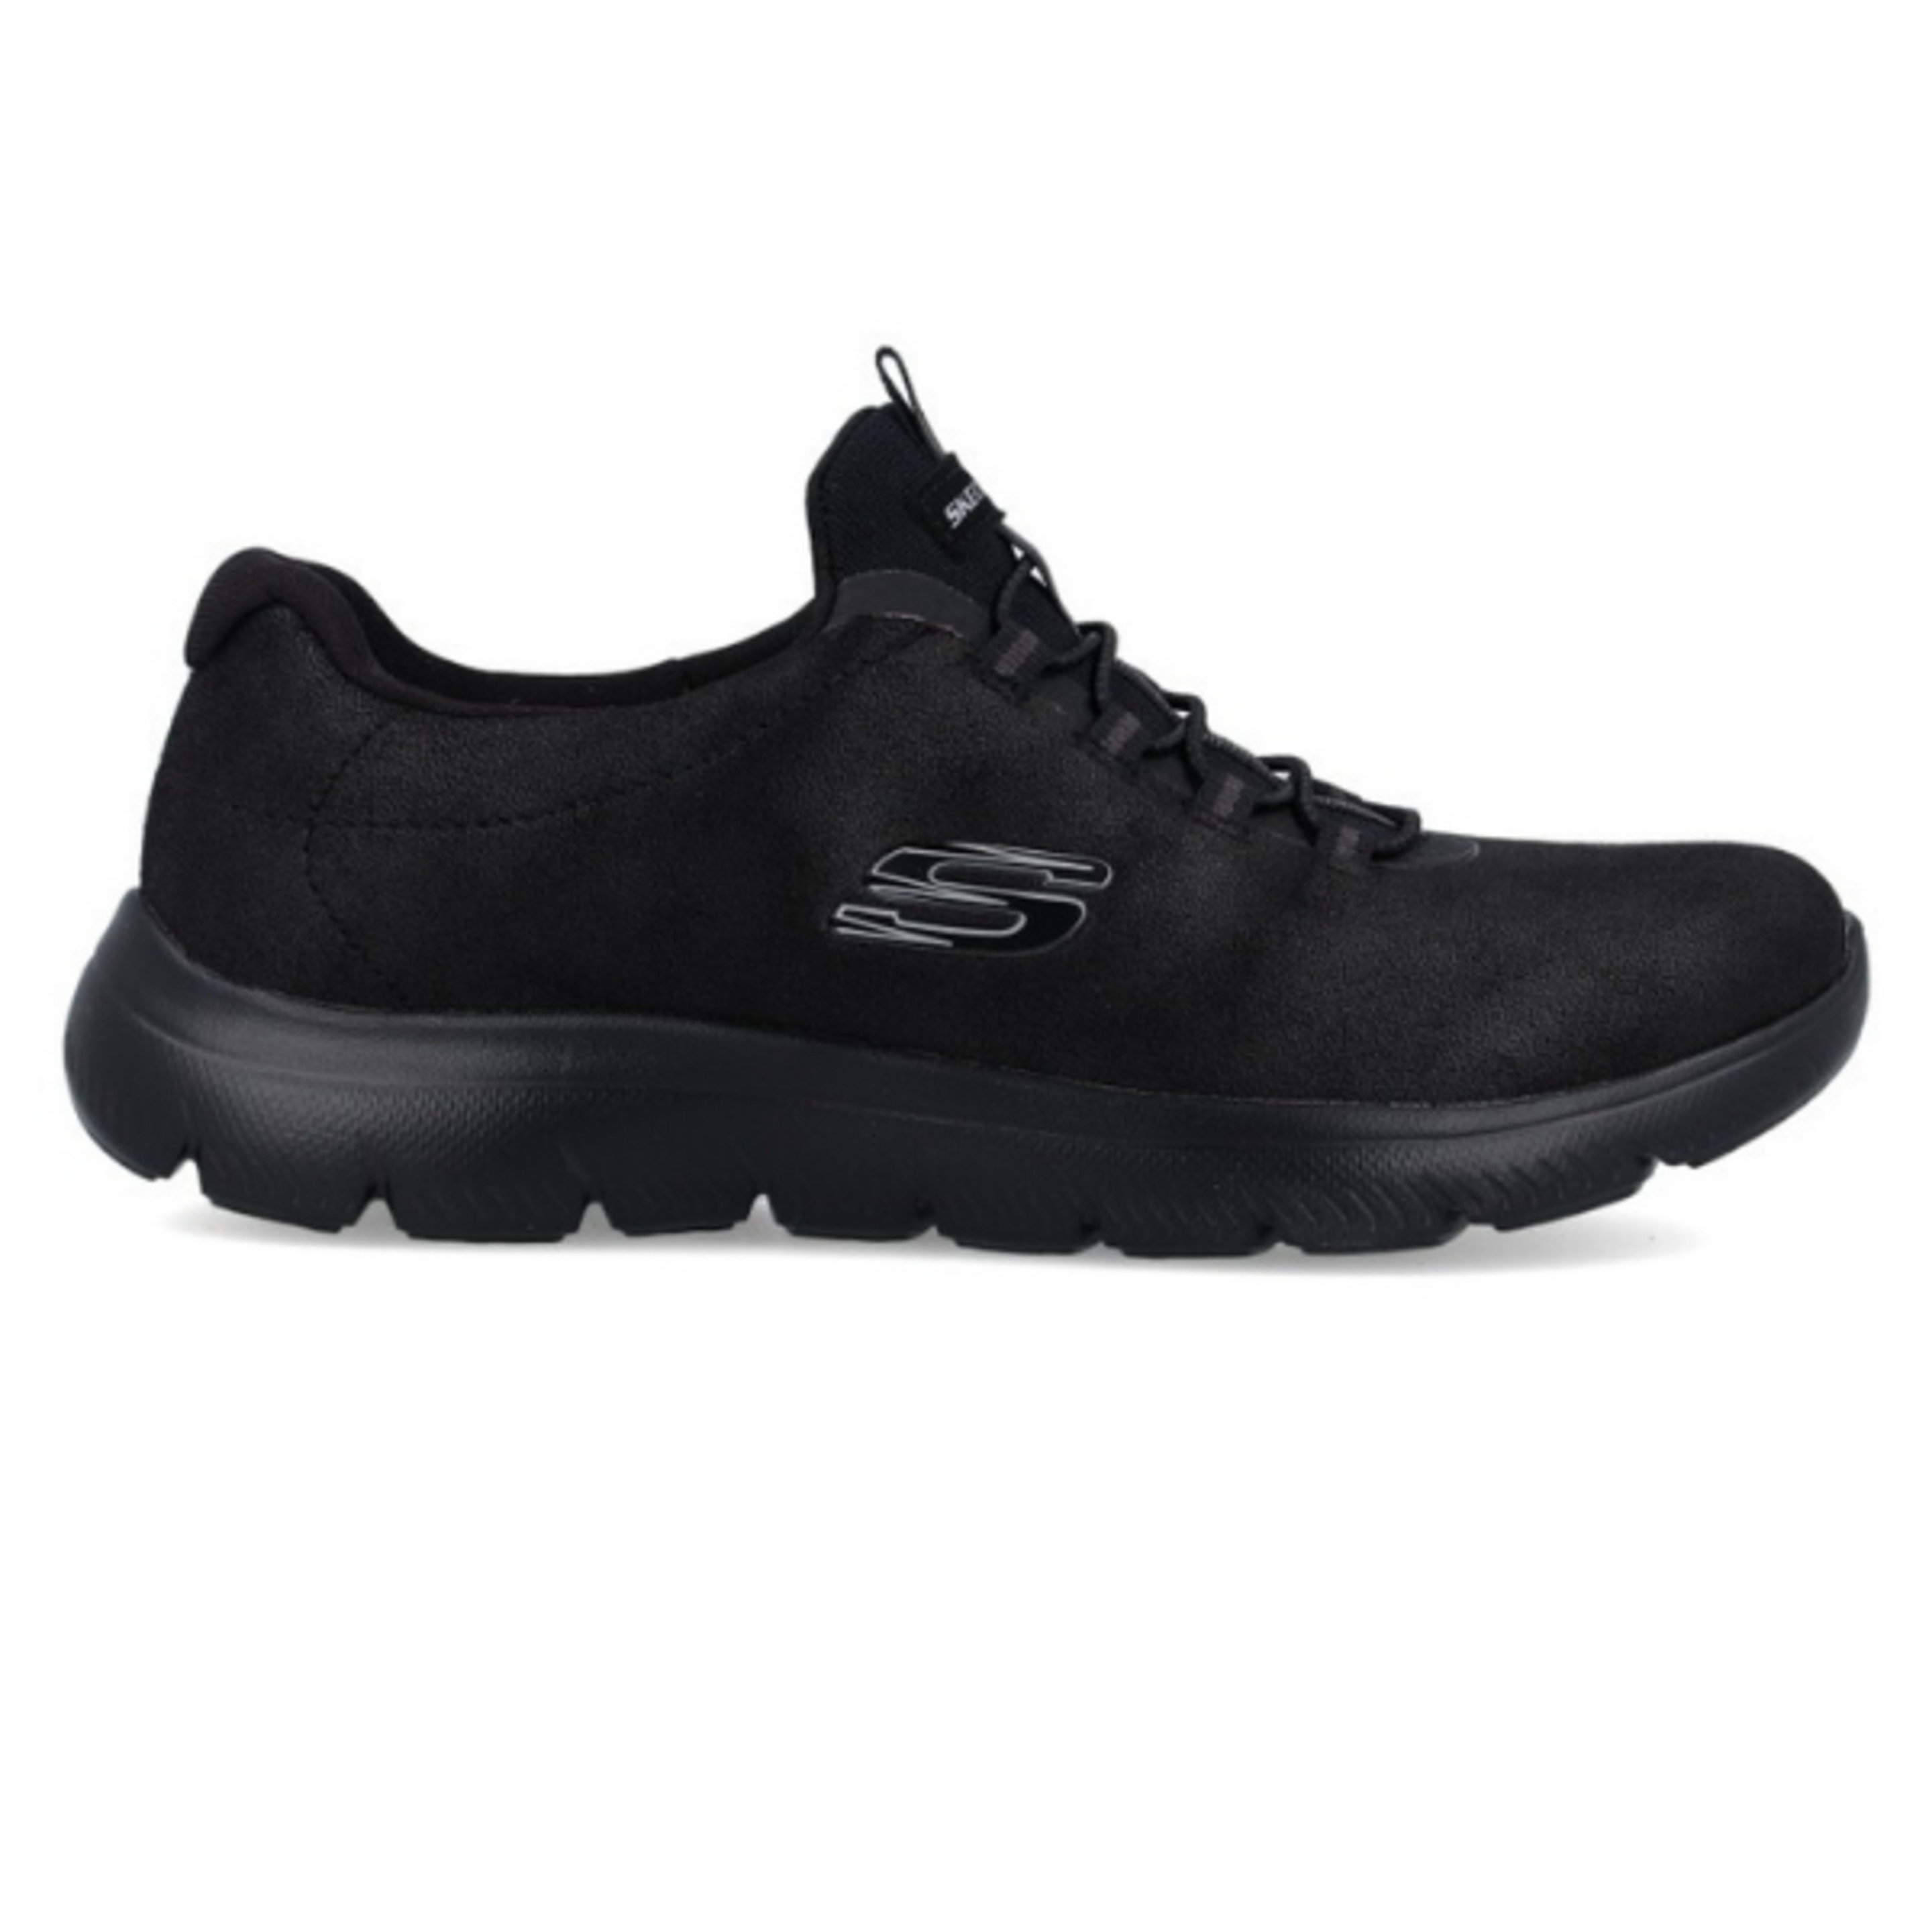 Sapatilhas Skechers Summiths - Oh So Smooth. 149200/bbk